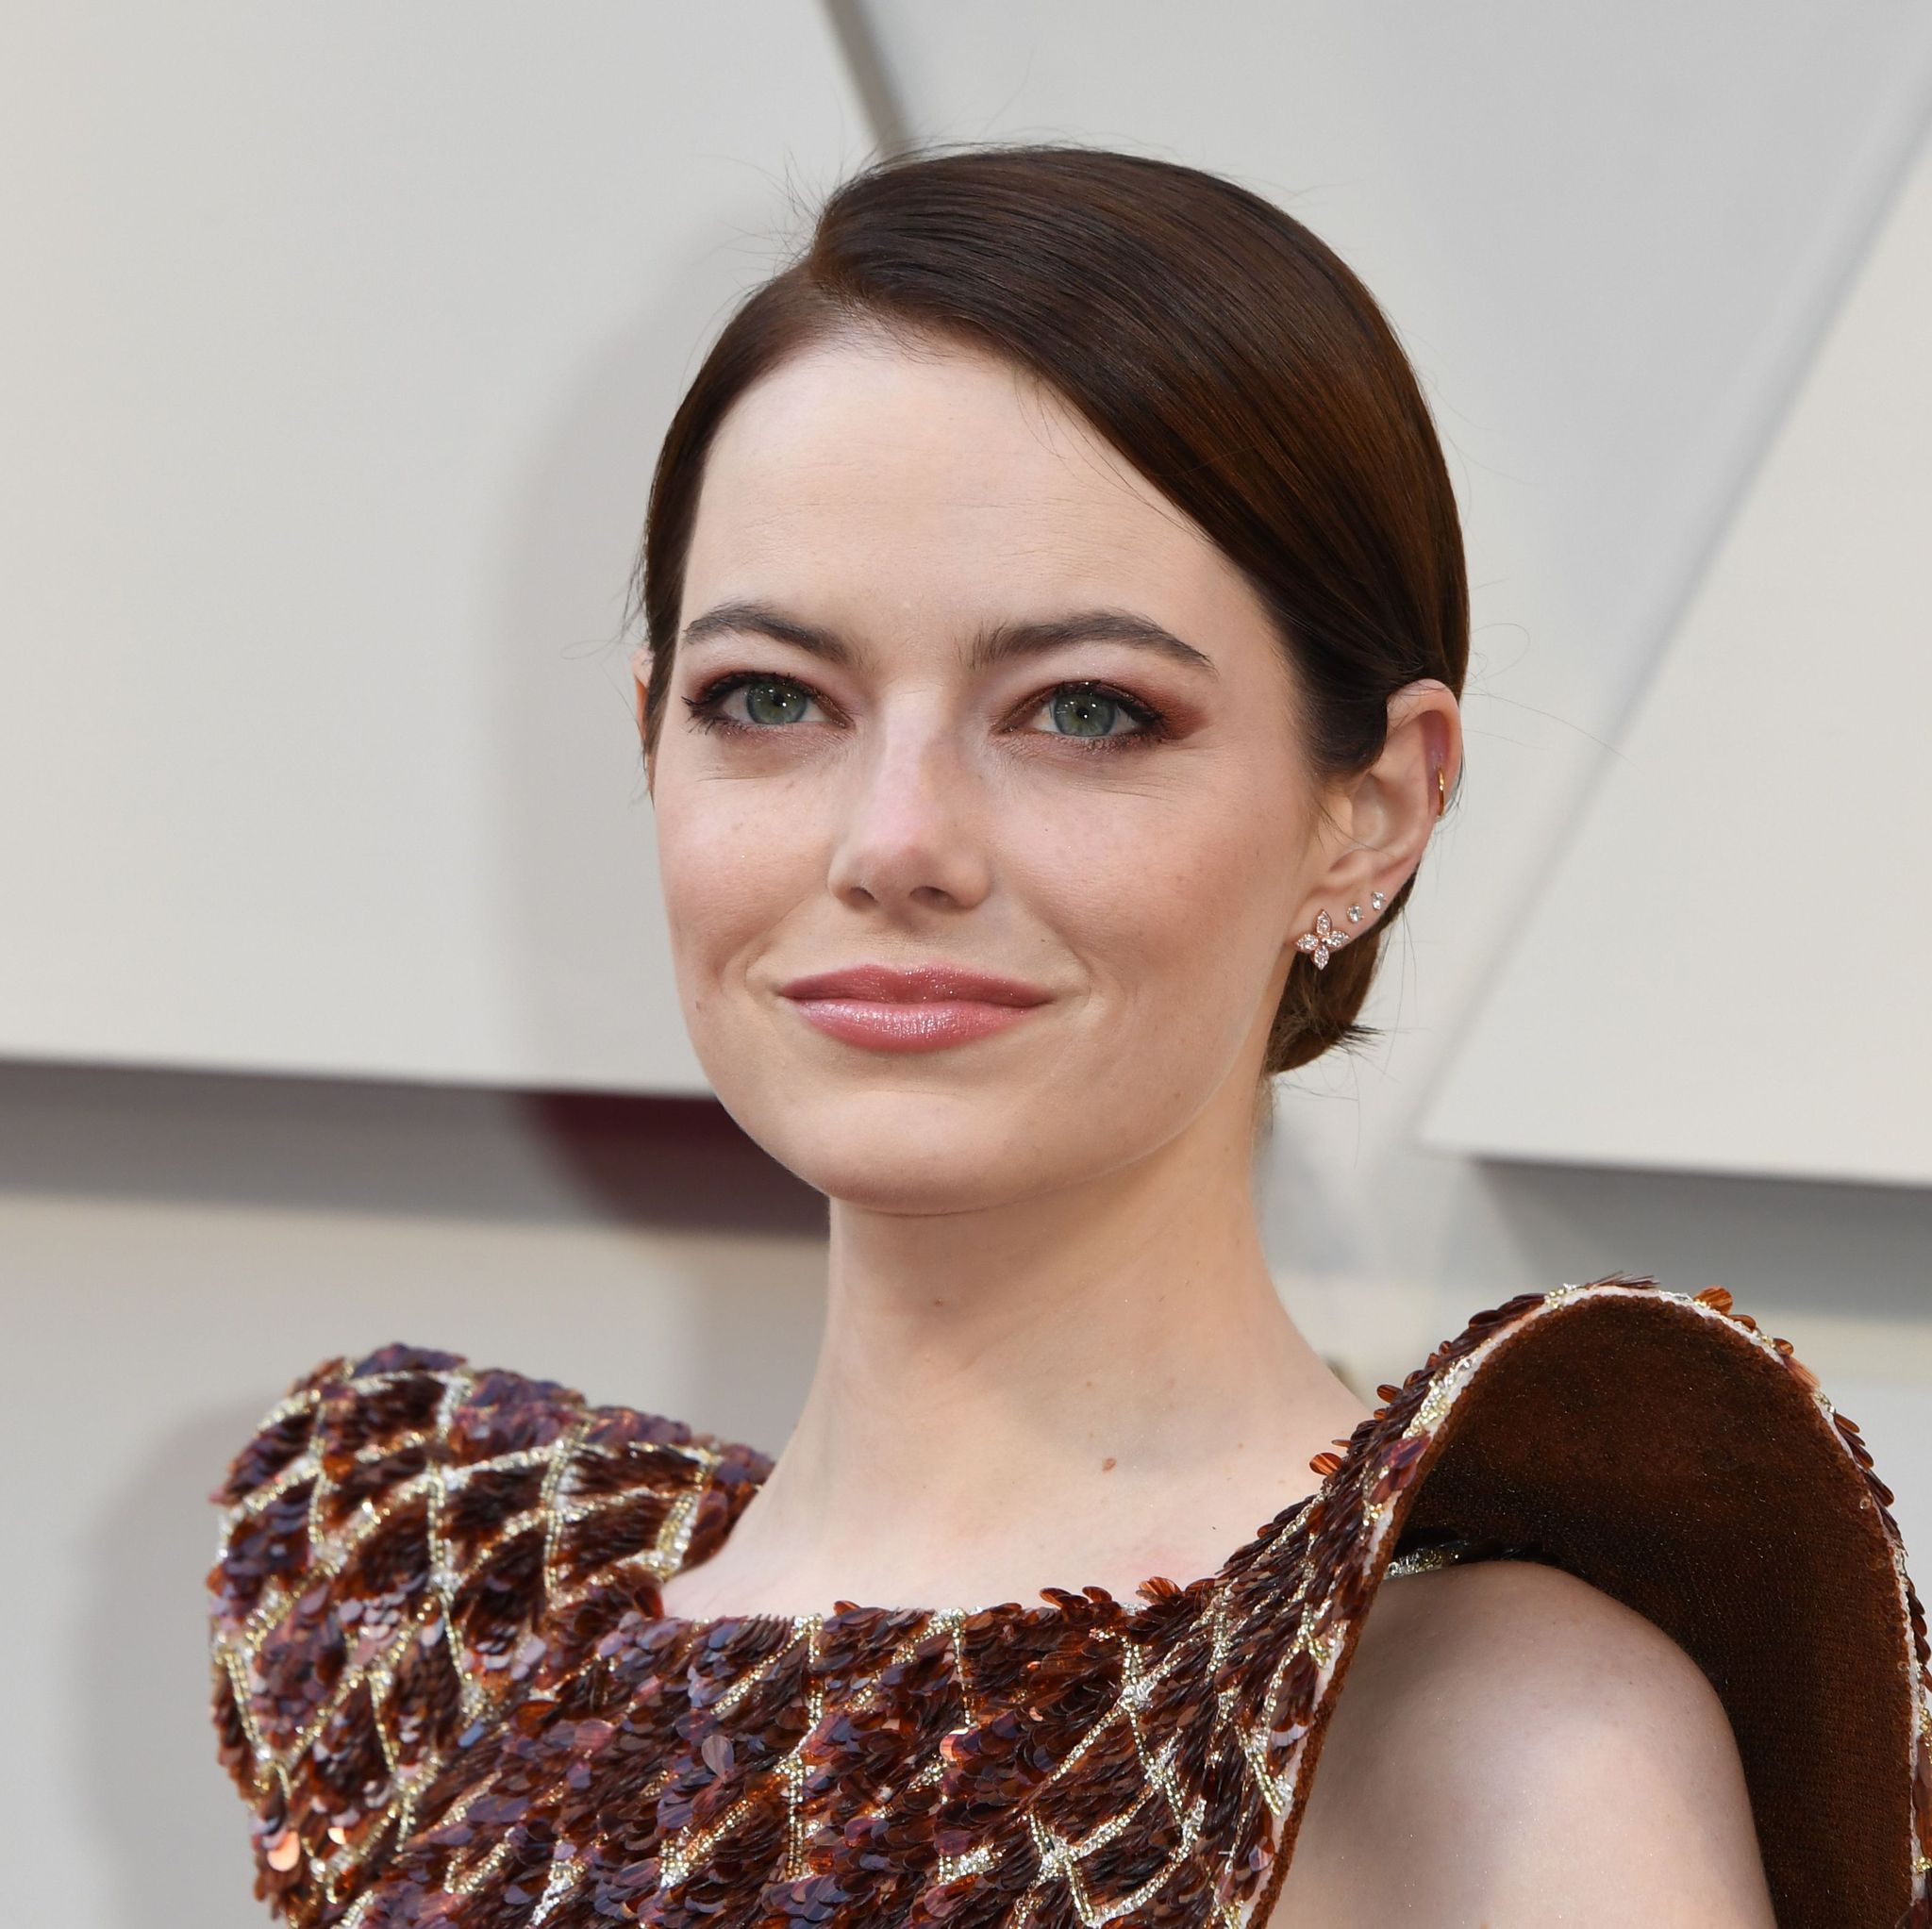 Emma Stone, latest Louis Vuitton ambassador, wearing a gown from